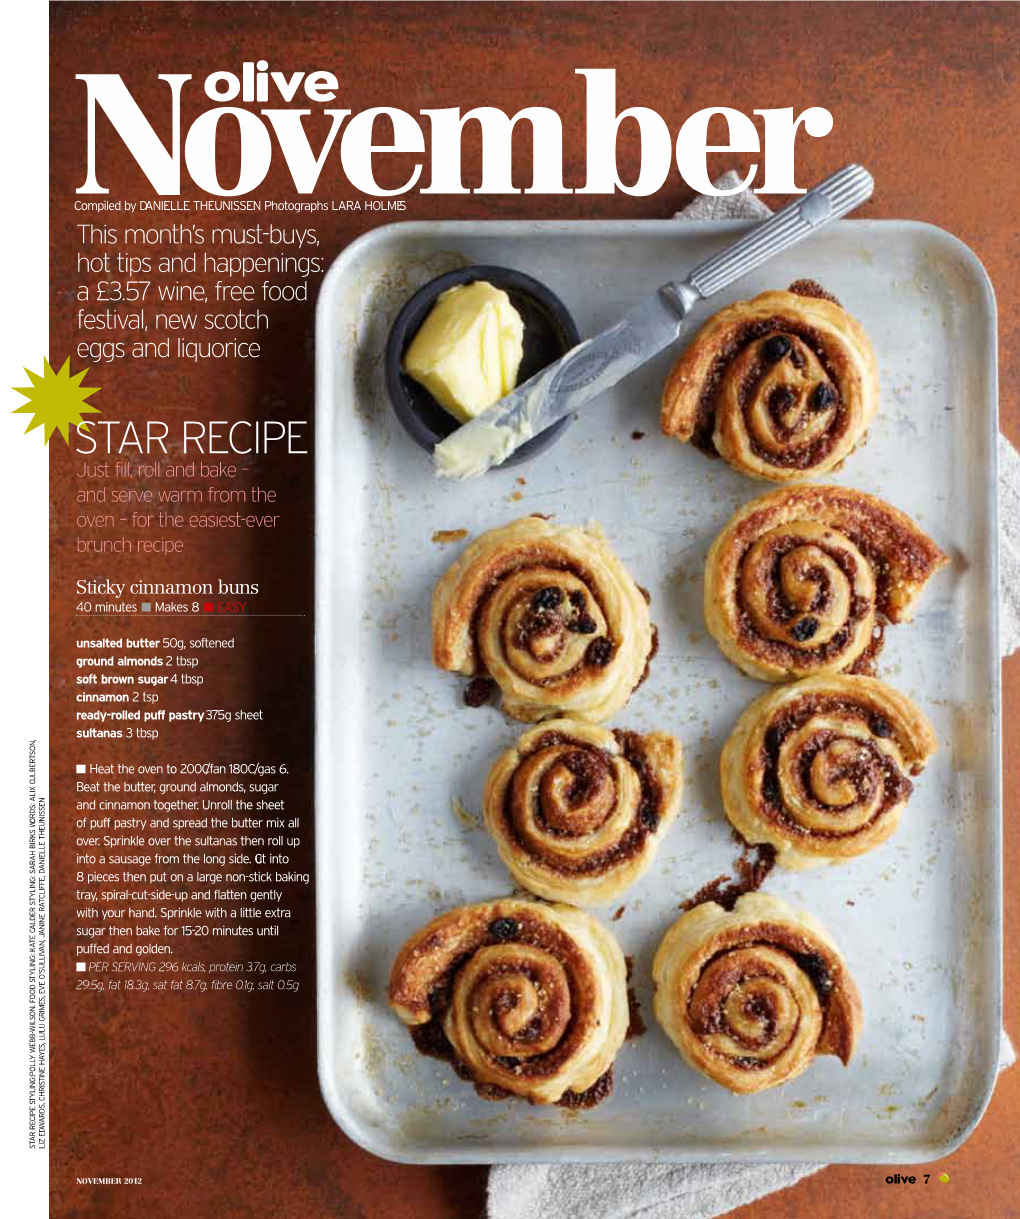 Star Recipe Just Fill, Roll and Bake – and Serve Warm from the Oven – for the Easiest-Ever Brunch Recipe